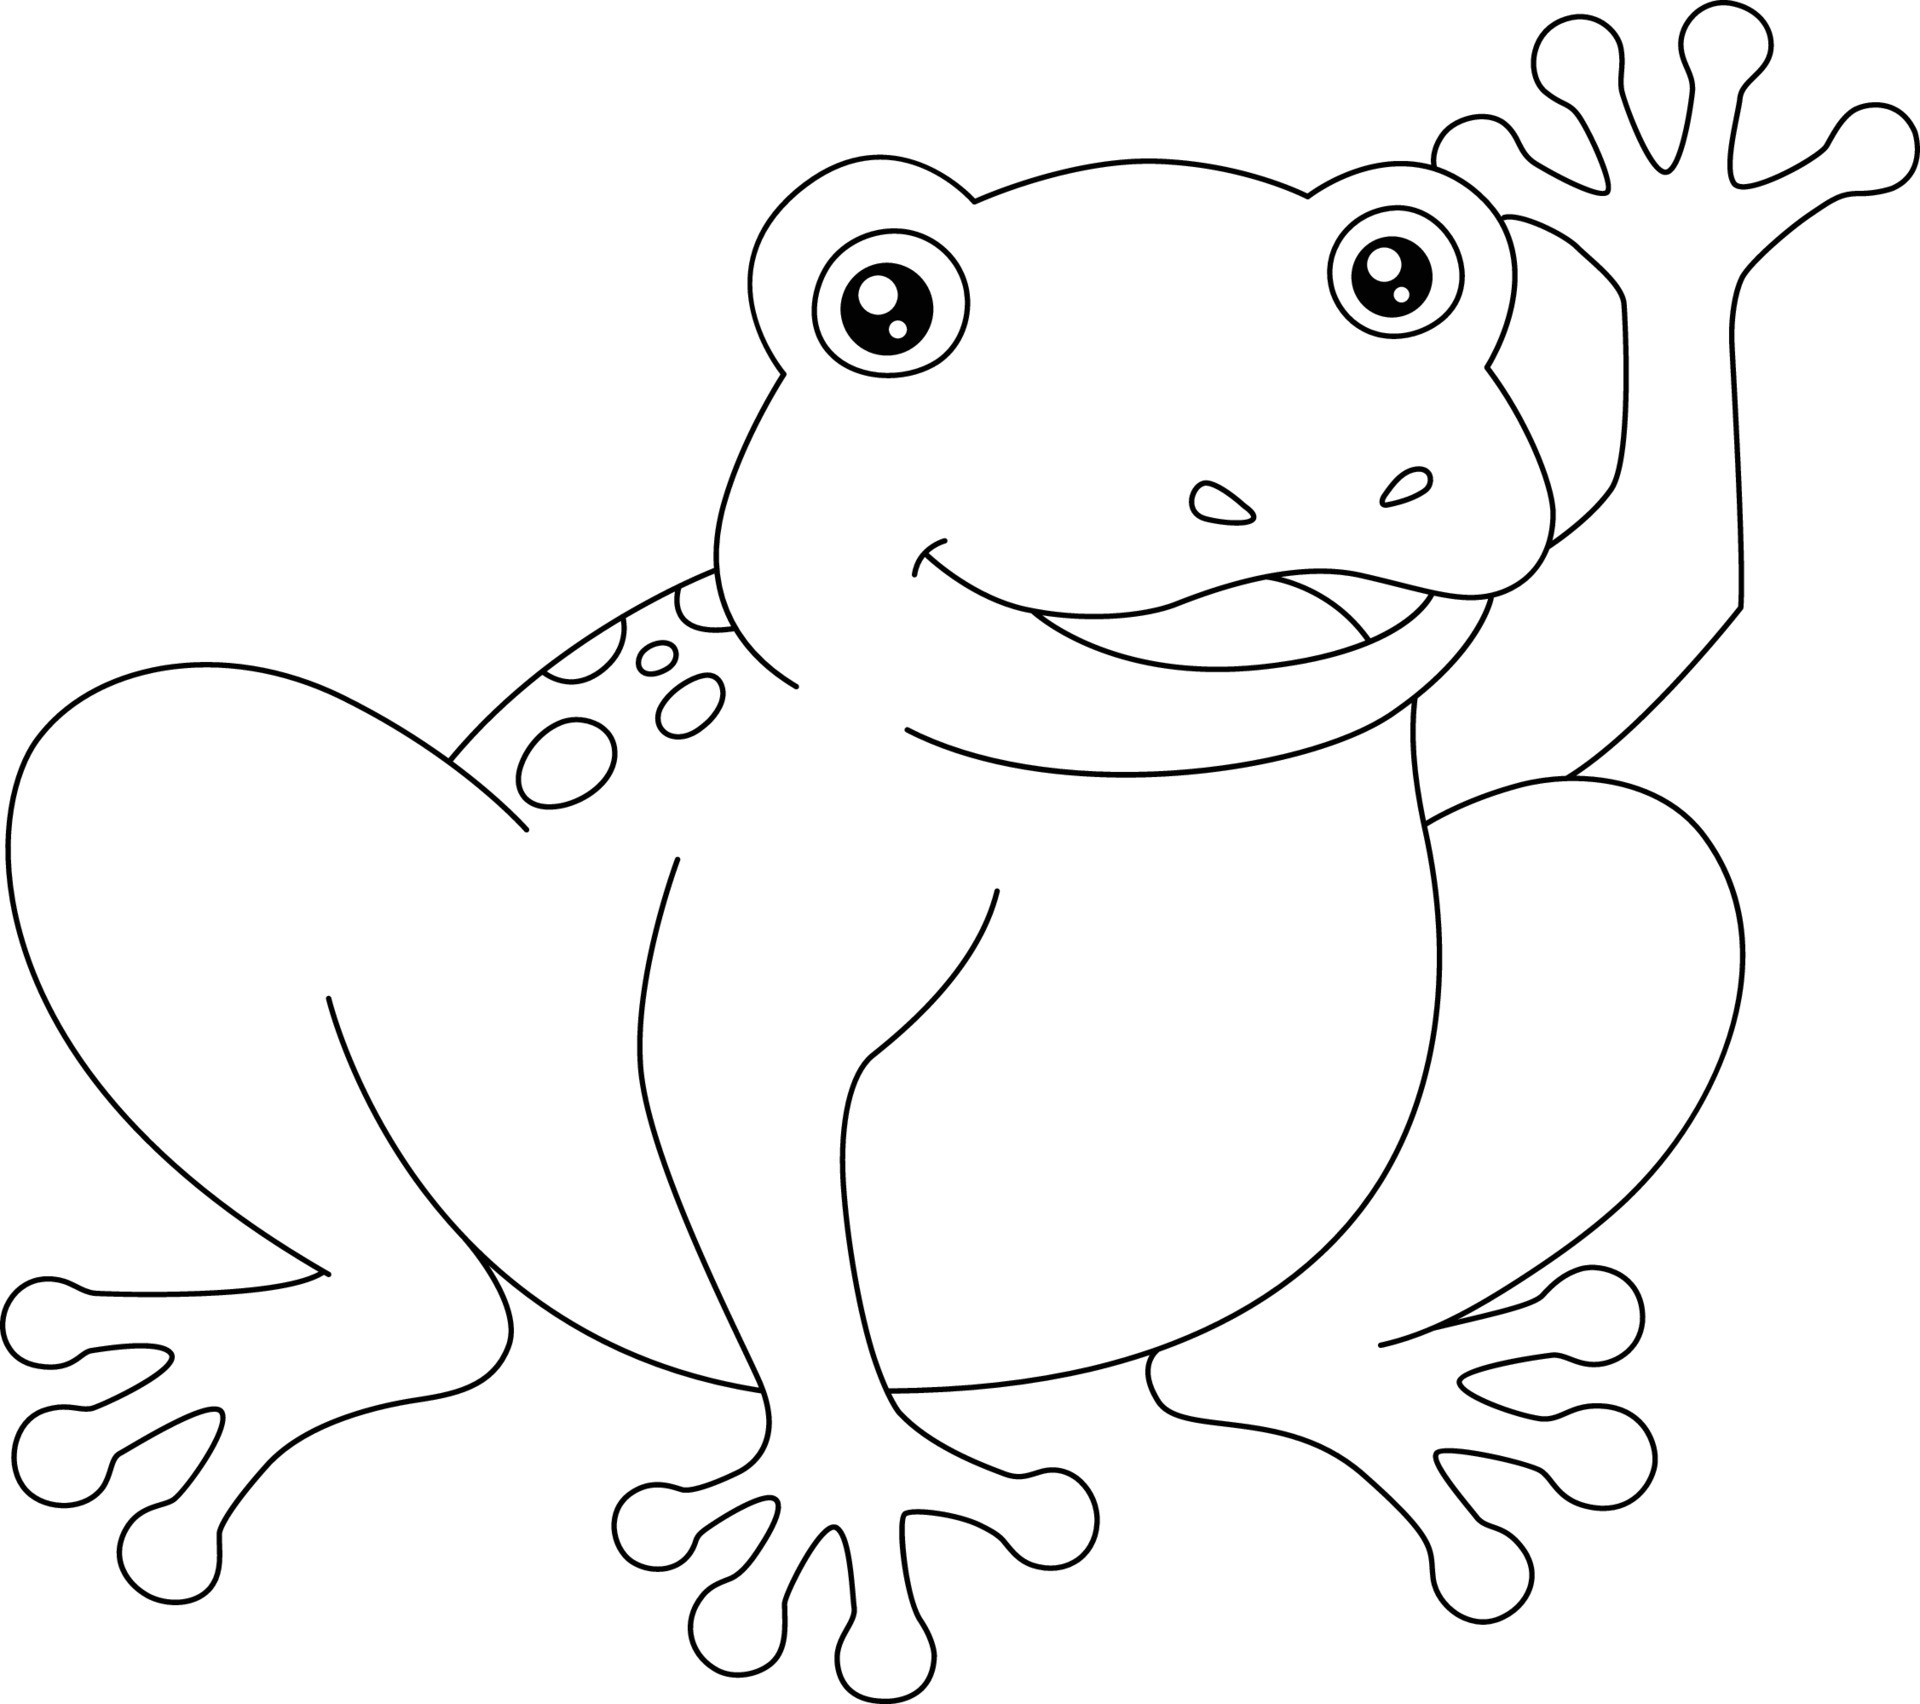 Frog Coloring Page Isolated for Kids 20 Vector Art at Vecteezy